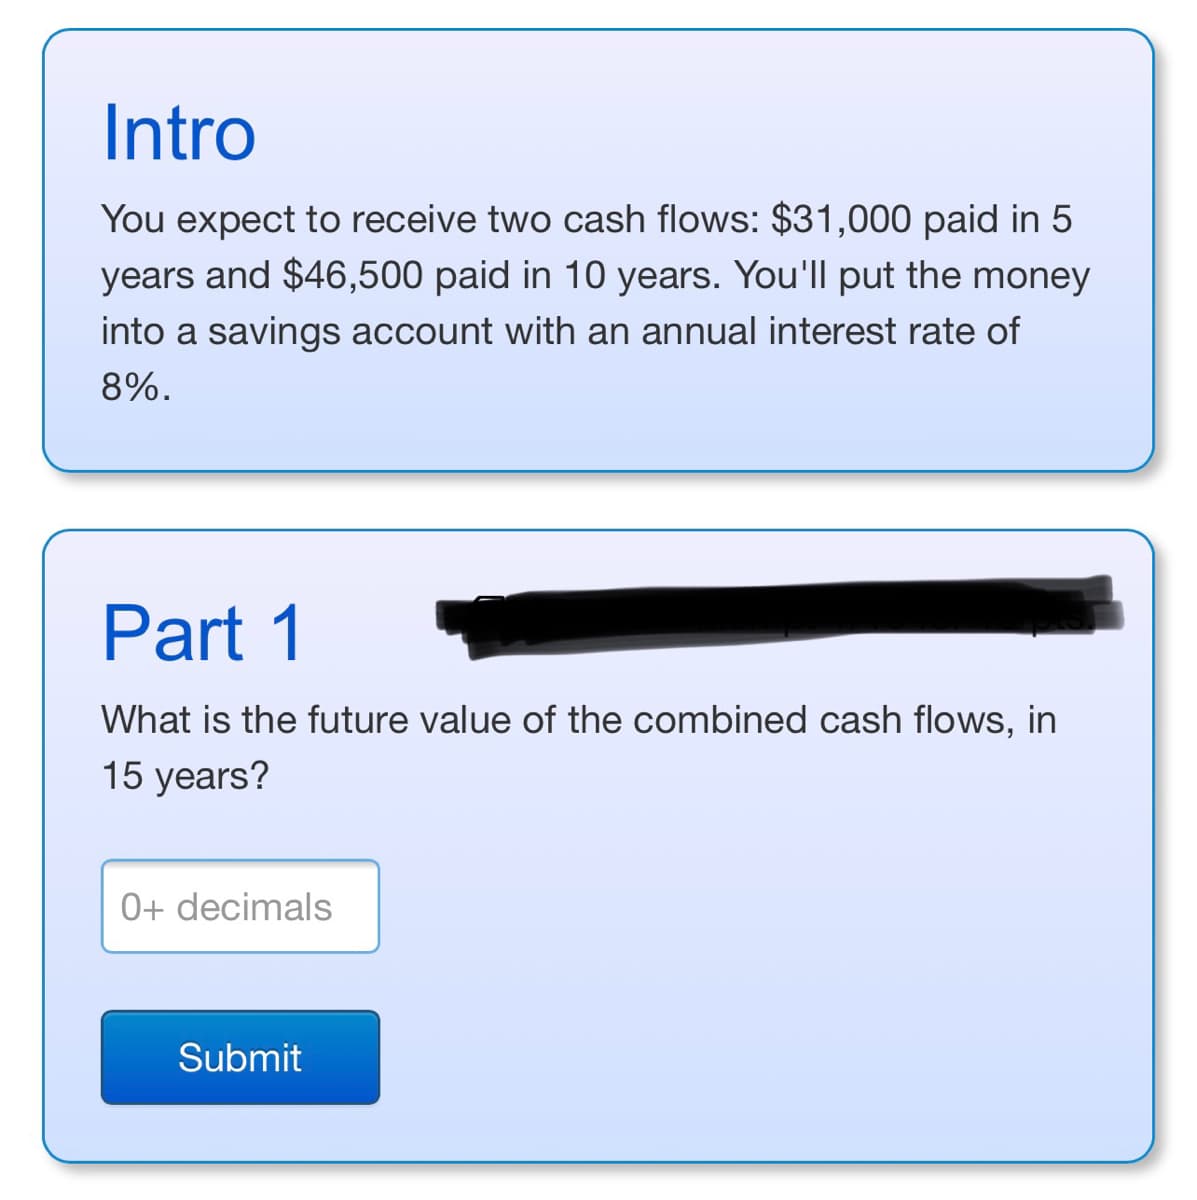 Intro
You expect to receive two cash flows: $31,000 paid in 5
years and $46,500 paid in 10 years. You'll put the money
into a savings account with an annual interest rate of
8%.
Part 1
What is the future value of the combined cash flows, in
15 years?
0+ decimals
Submit